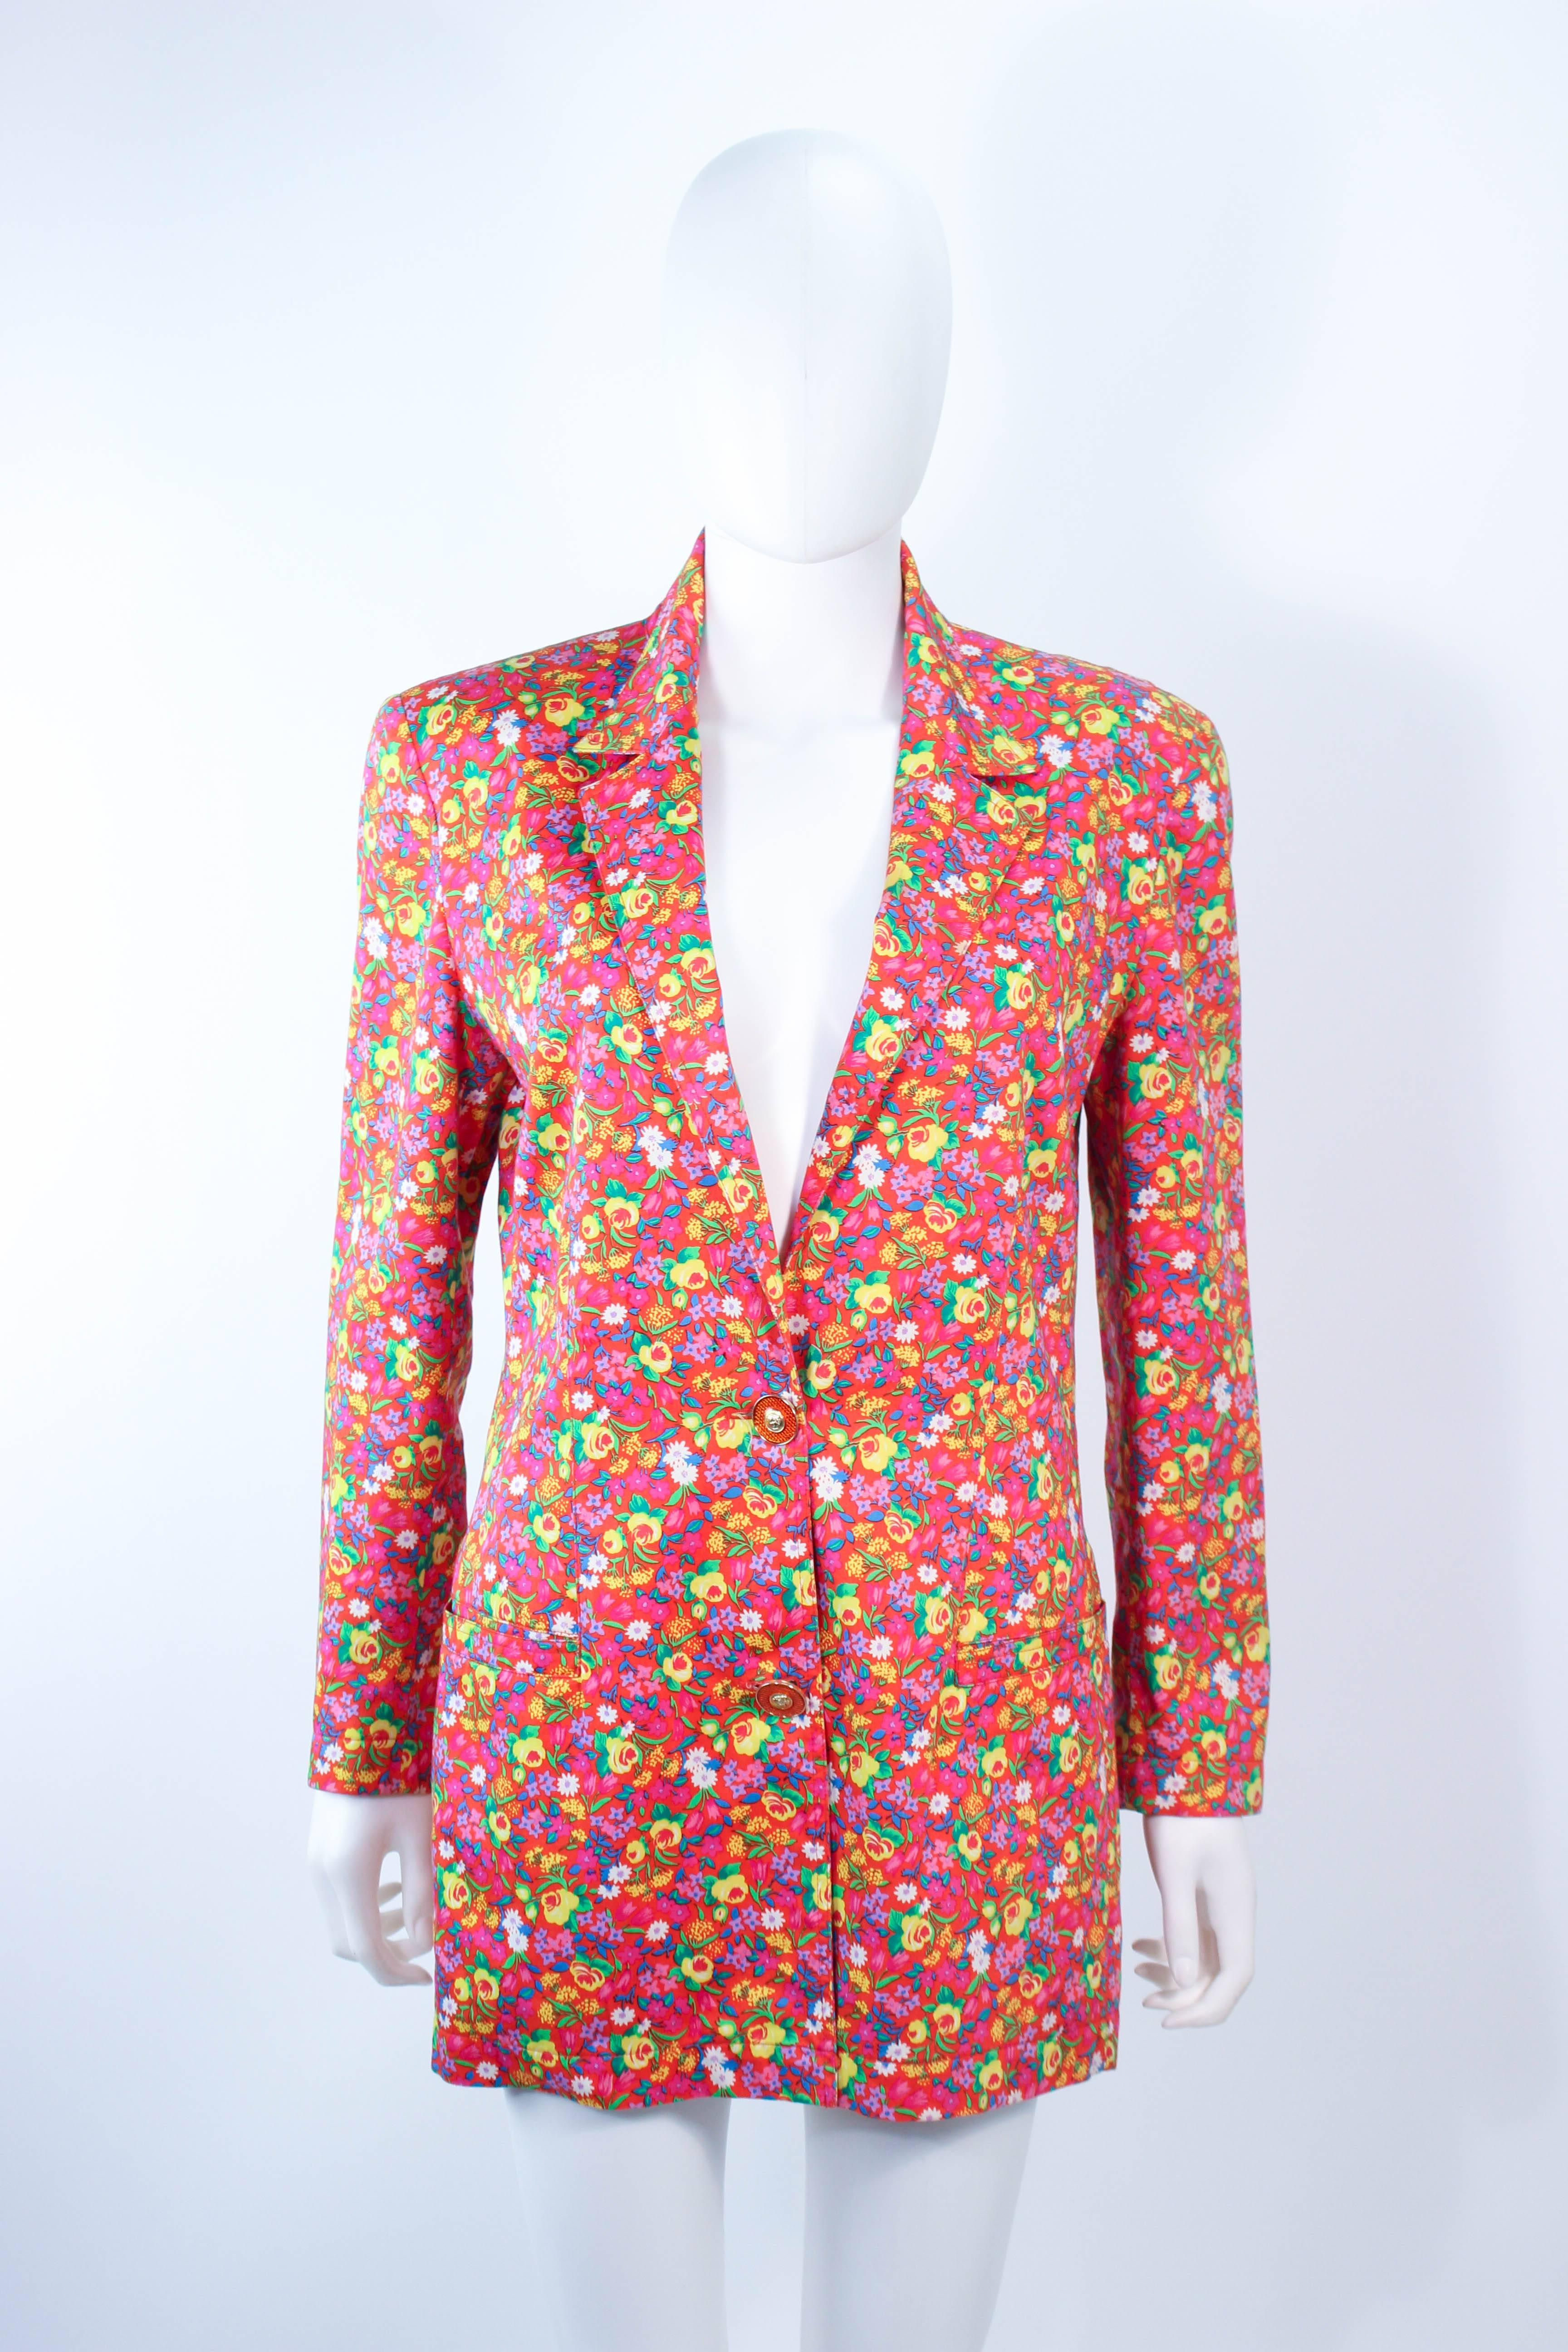 This Gianni Versace blazer is composed of a lightweight floral print cotton. Features center front medusa logo buttons. In excellent vintage condition.

**Please cross-reference measurements for personal accuracy. Size in description box is an